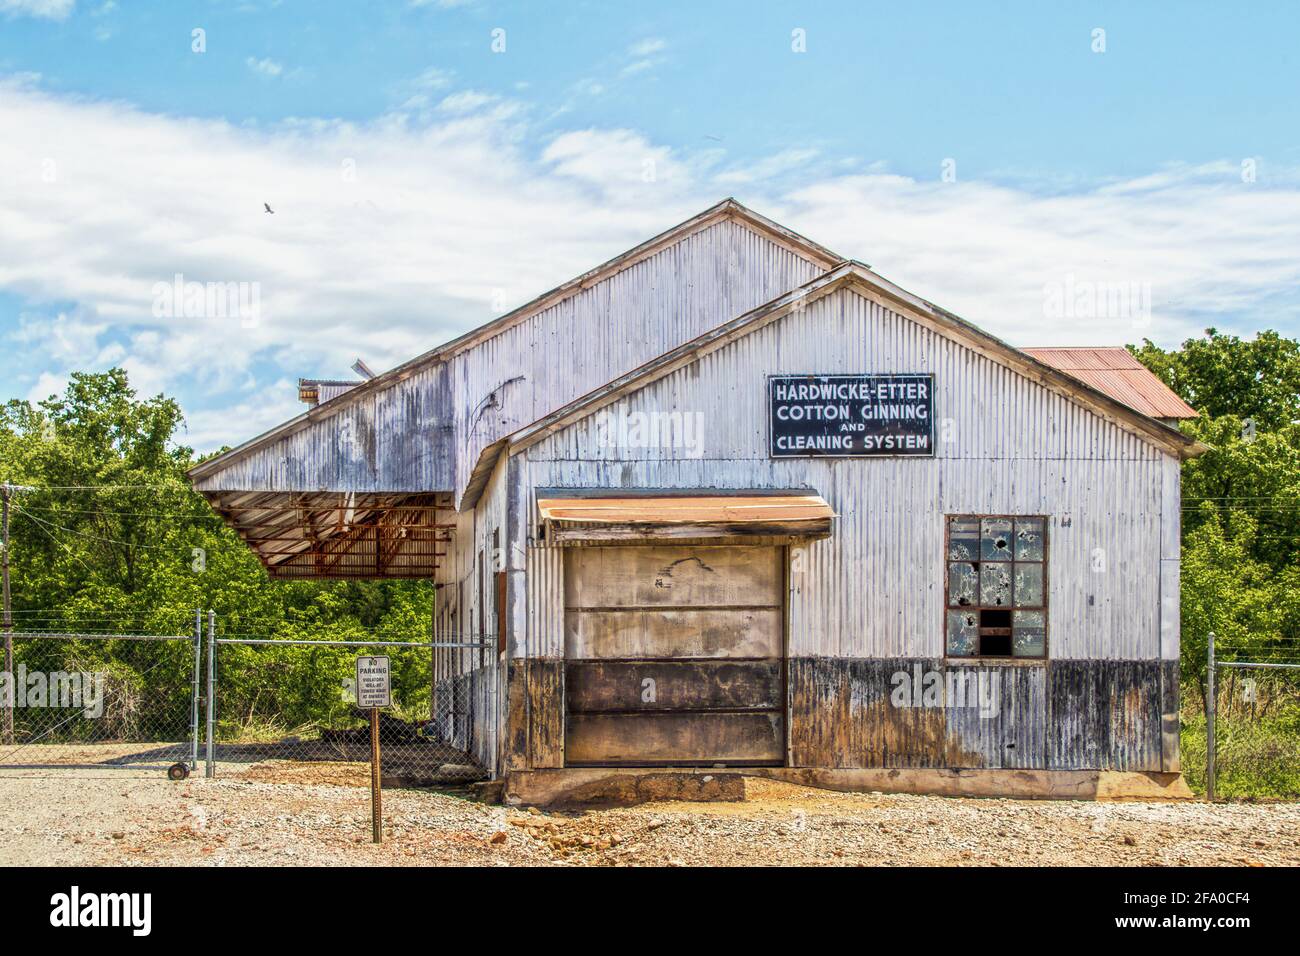 05-14-2020 Yale Oklahoma USA - Old abandoned rusty Cotton Ginning and Cleaning system corragated steel builiding with window shot out abandoned Stock Photo